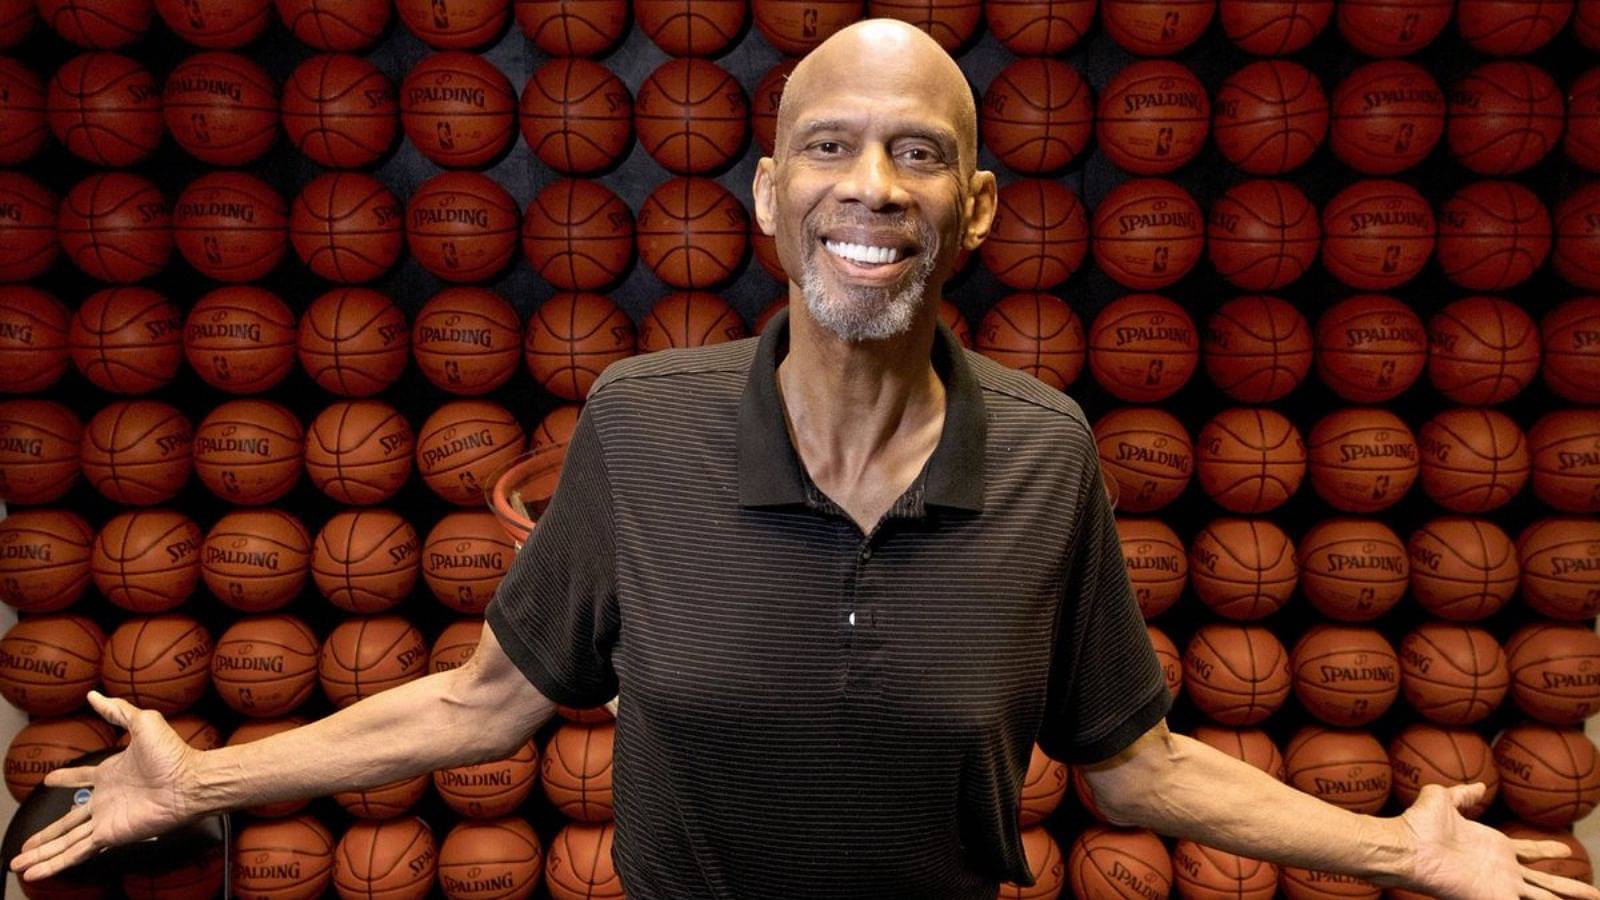 Kareem Abdul-Jabbar is worth over $20 million but still brought up being the number 1 all-time scorer with just 1 made 3-point shot on the Jimmy Fallon show